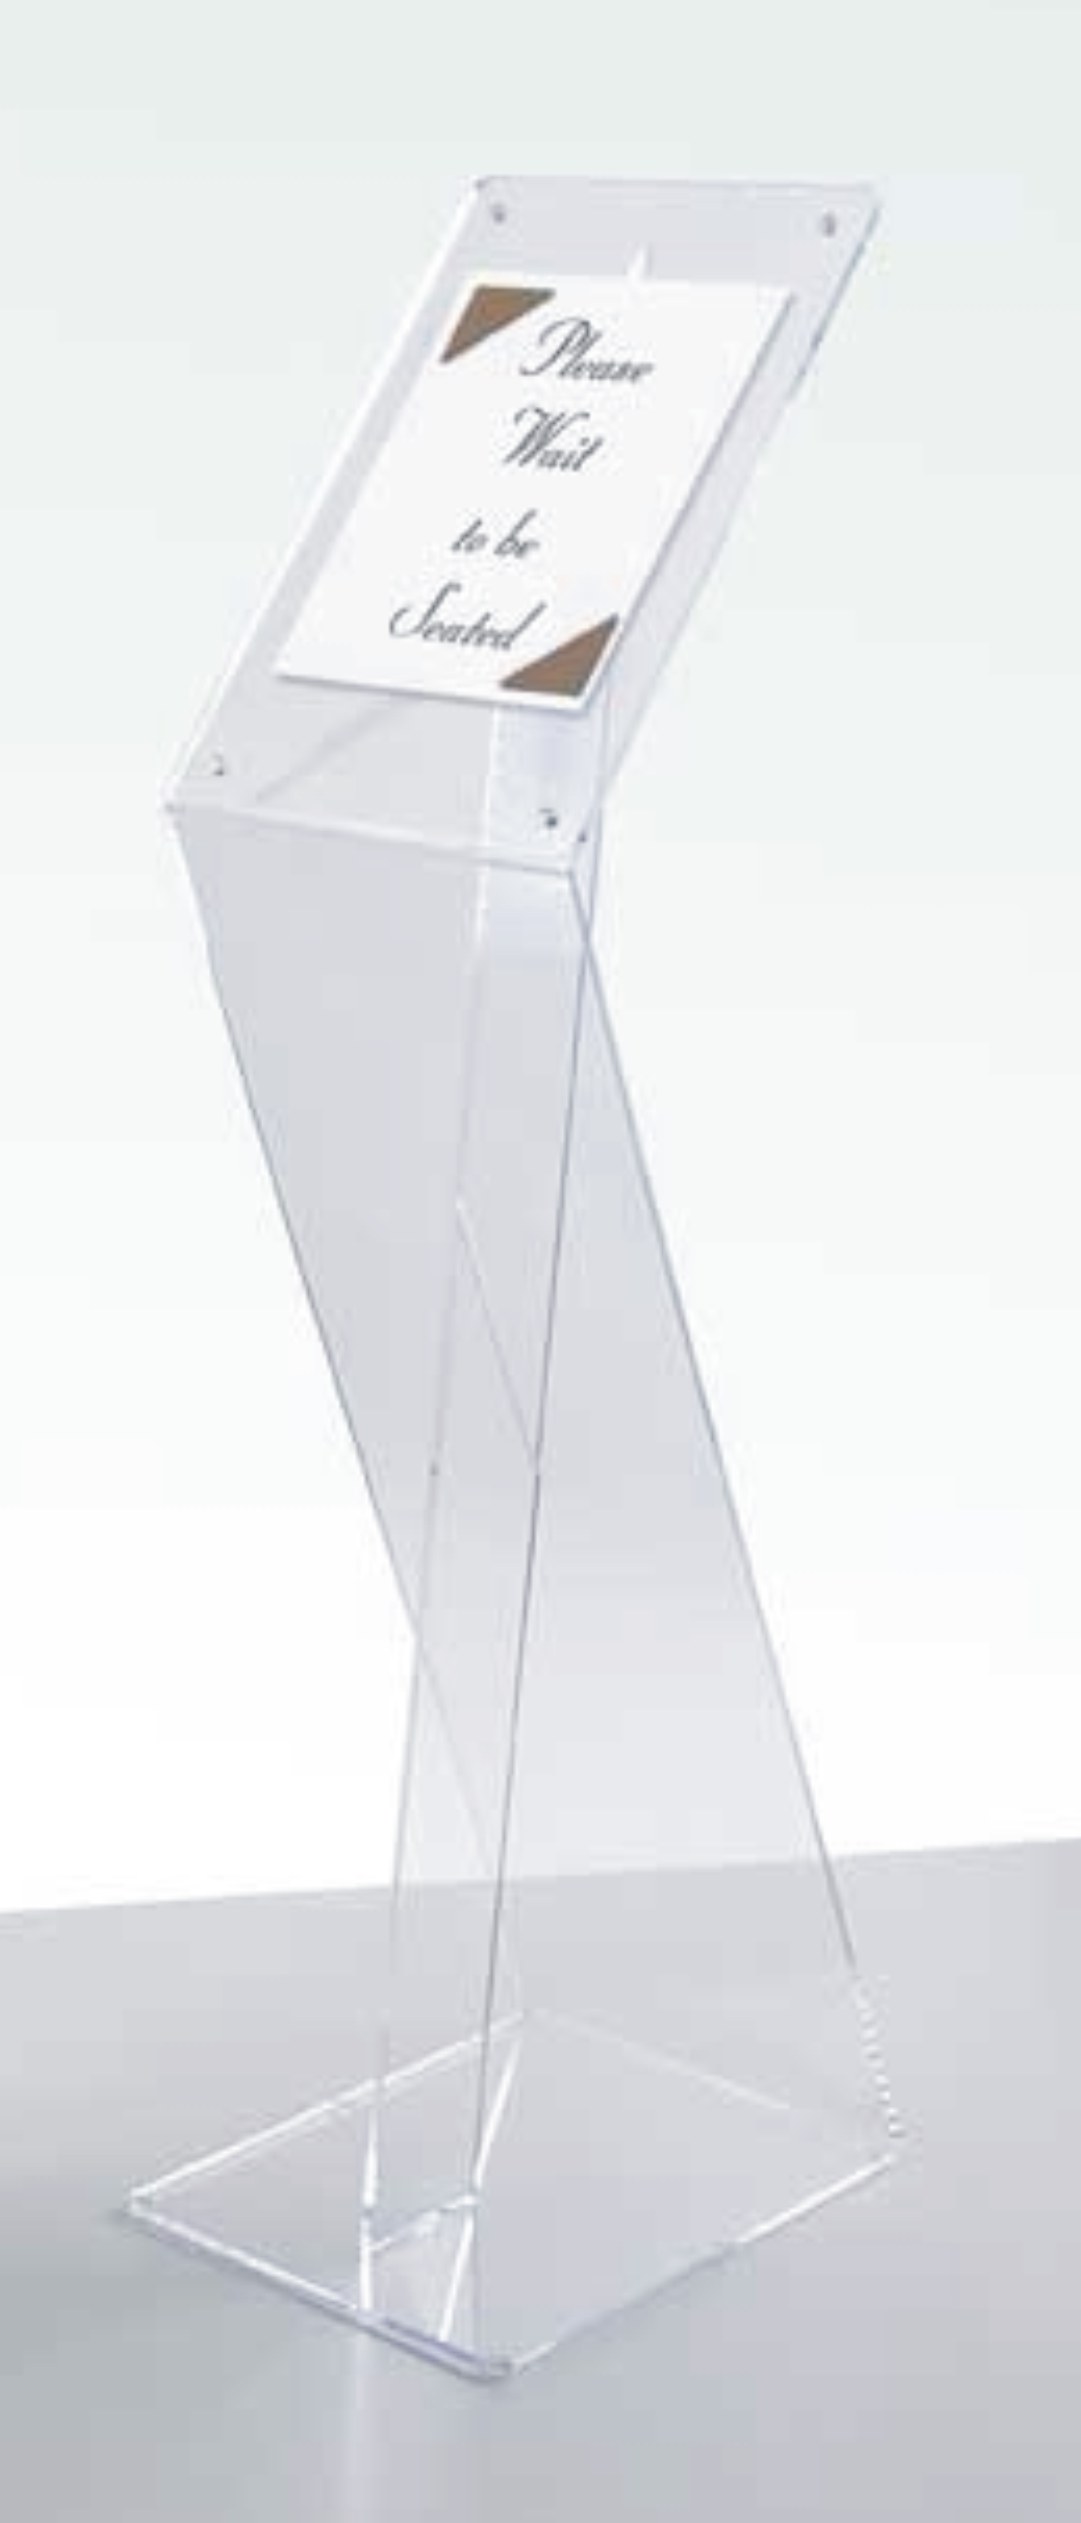 Free-Standing Sign Display.         Categ  12-98 34-183